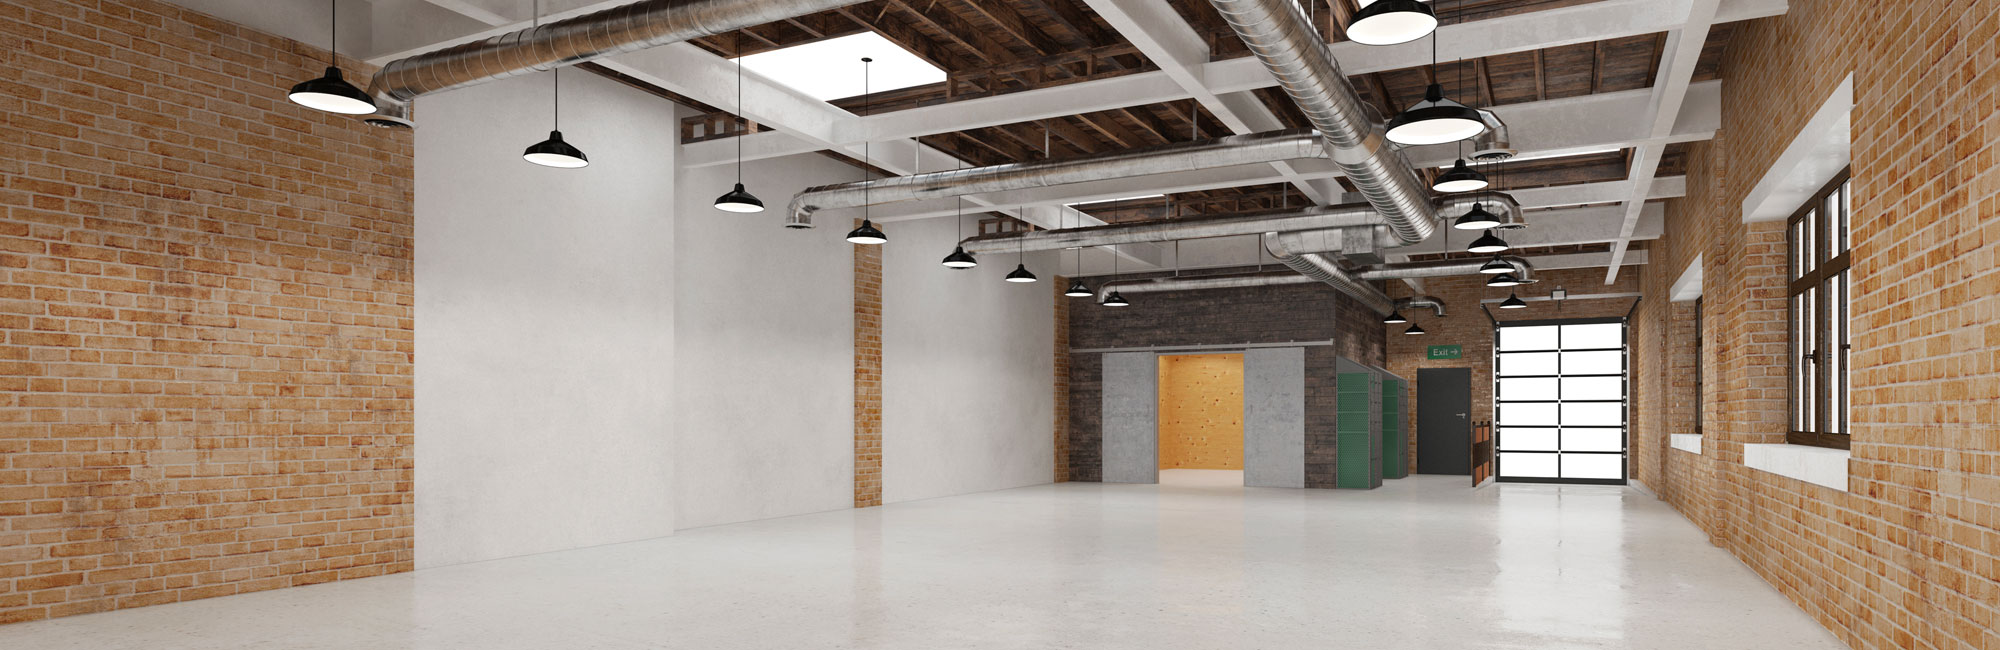 Planning a Warehouse-to-Office Conversion Design